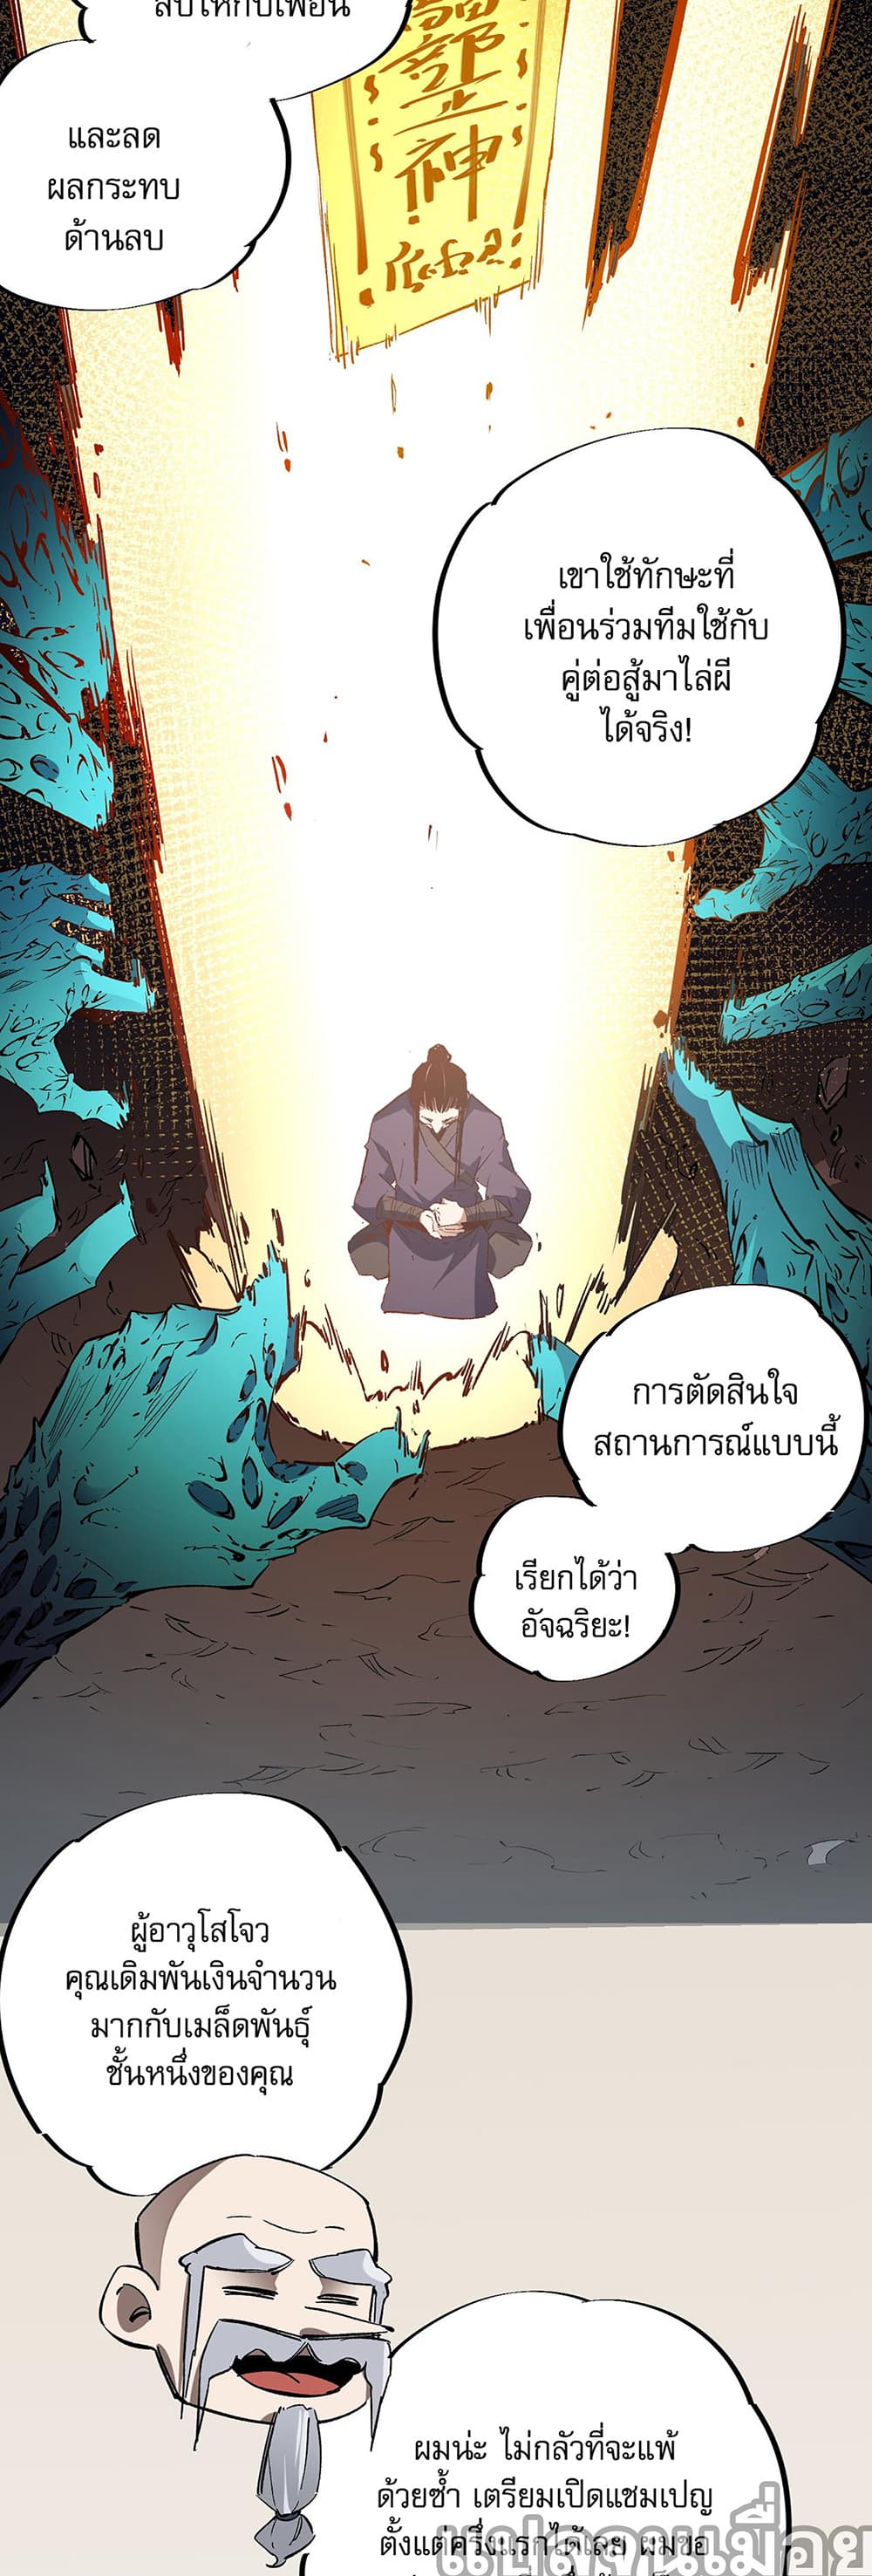 Job Changing for the Entire Population: The Jobless Me Will Terminate the Gods ฉันคือผู้เล่นไร้อาชีพที่สังหารเหล่าเทพ 33-33